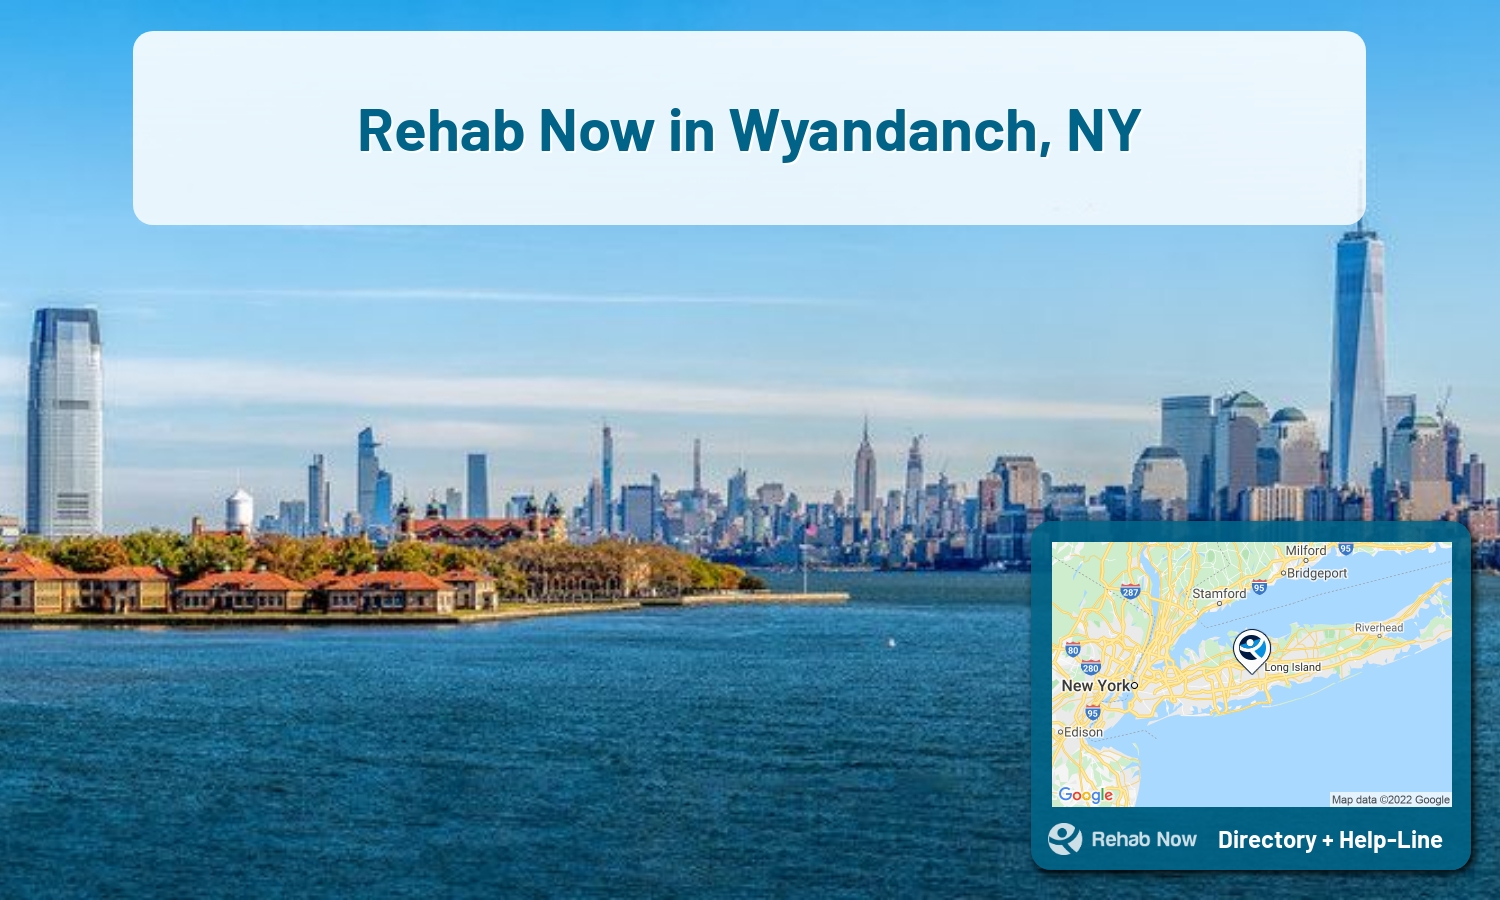 Wyandanch, NY Treatment Centers. Find drug rehab in Wyandanch, New York, or detox and treatment programs. Get the right help now!